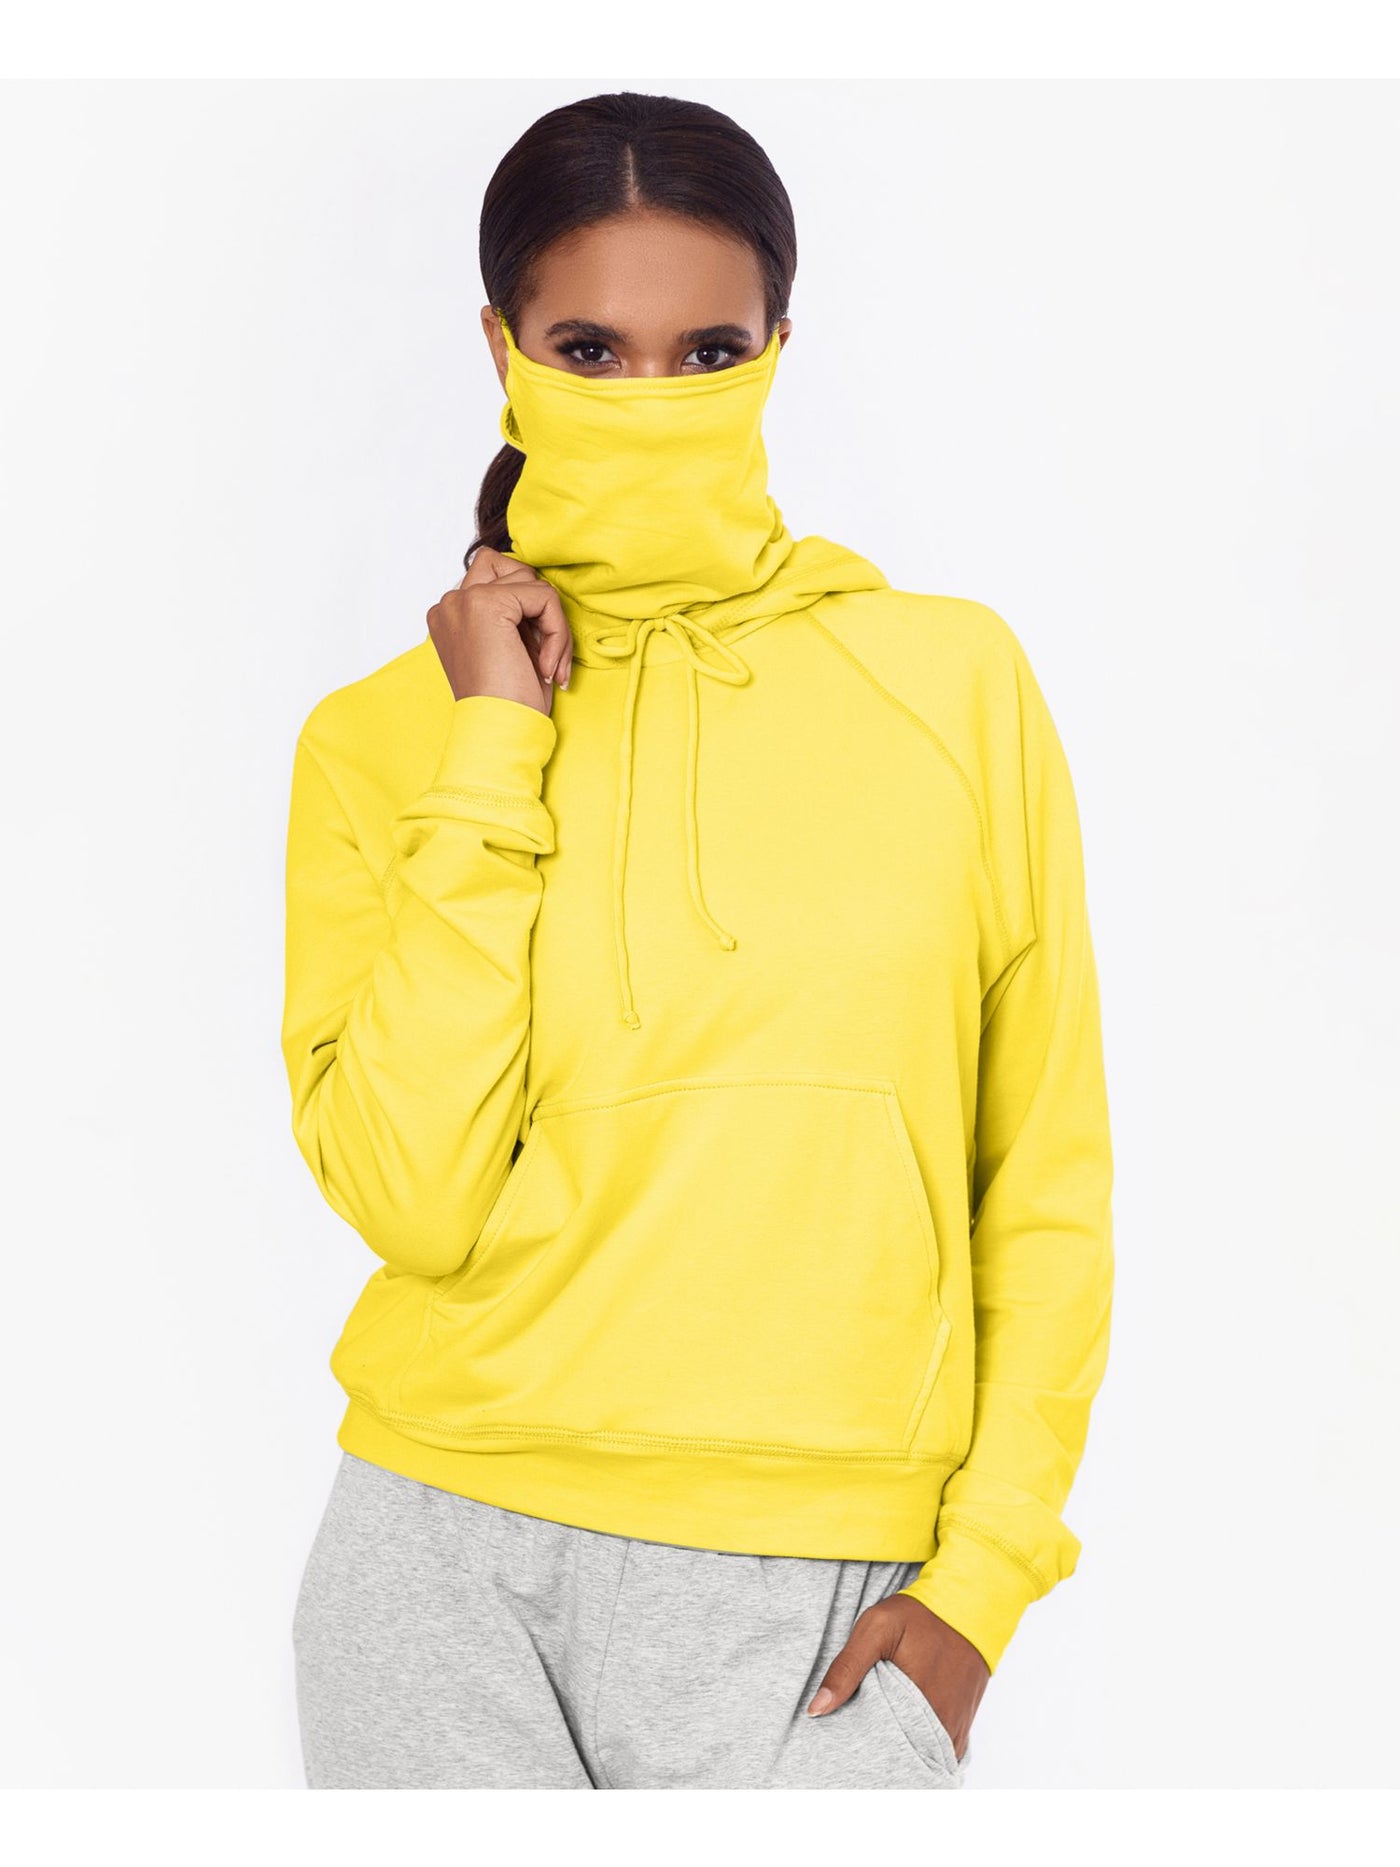 BAM BY BETSY & ADAM Womens Yellow Stretch Tie Pocketed Built-in Mask, Relaxed Fit Long Sleeve Hoodie Top S